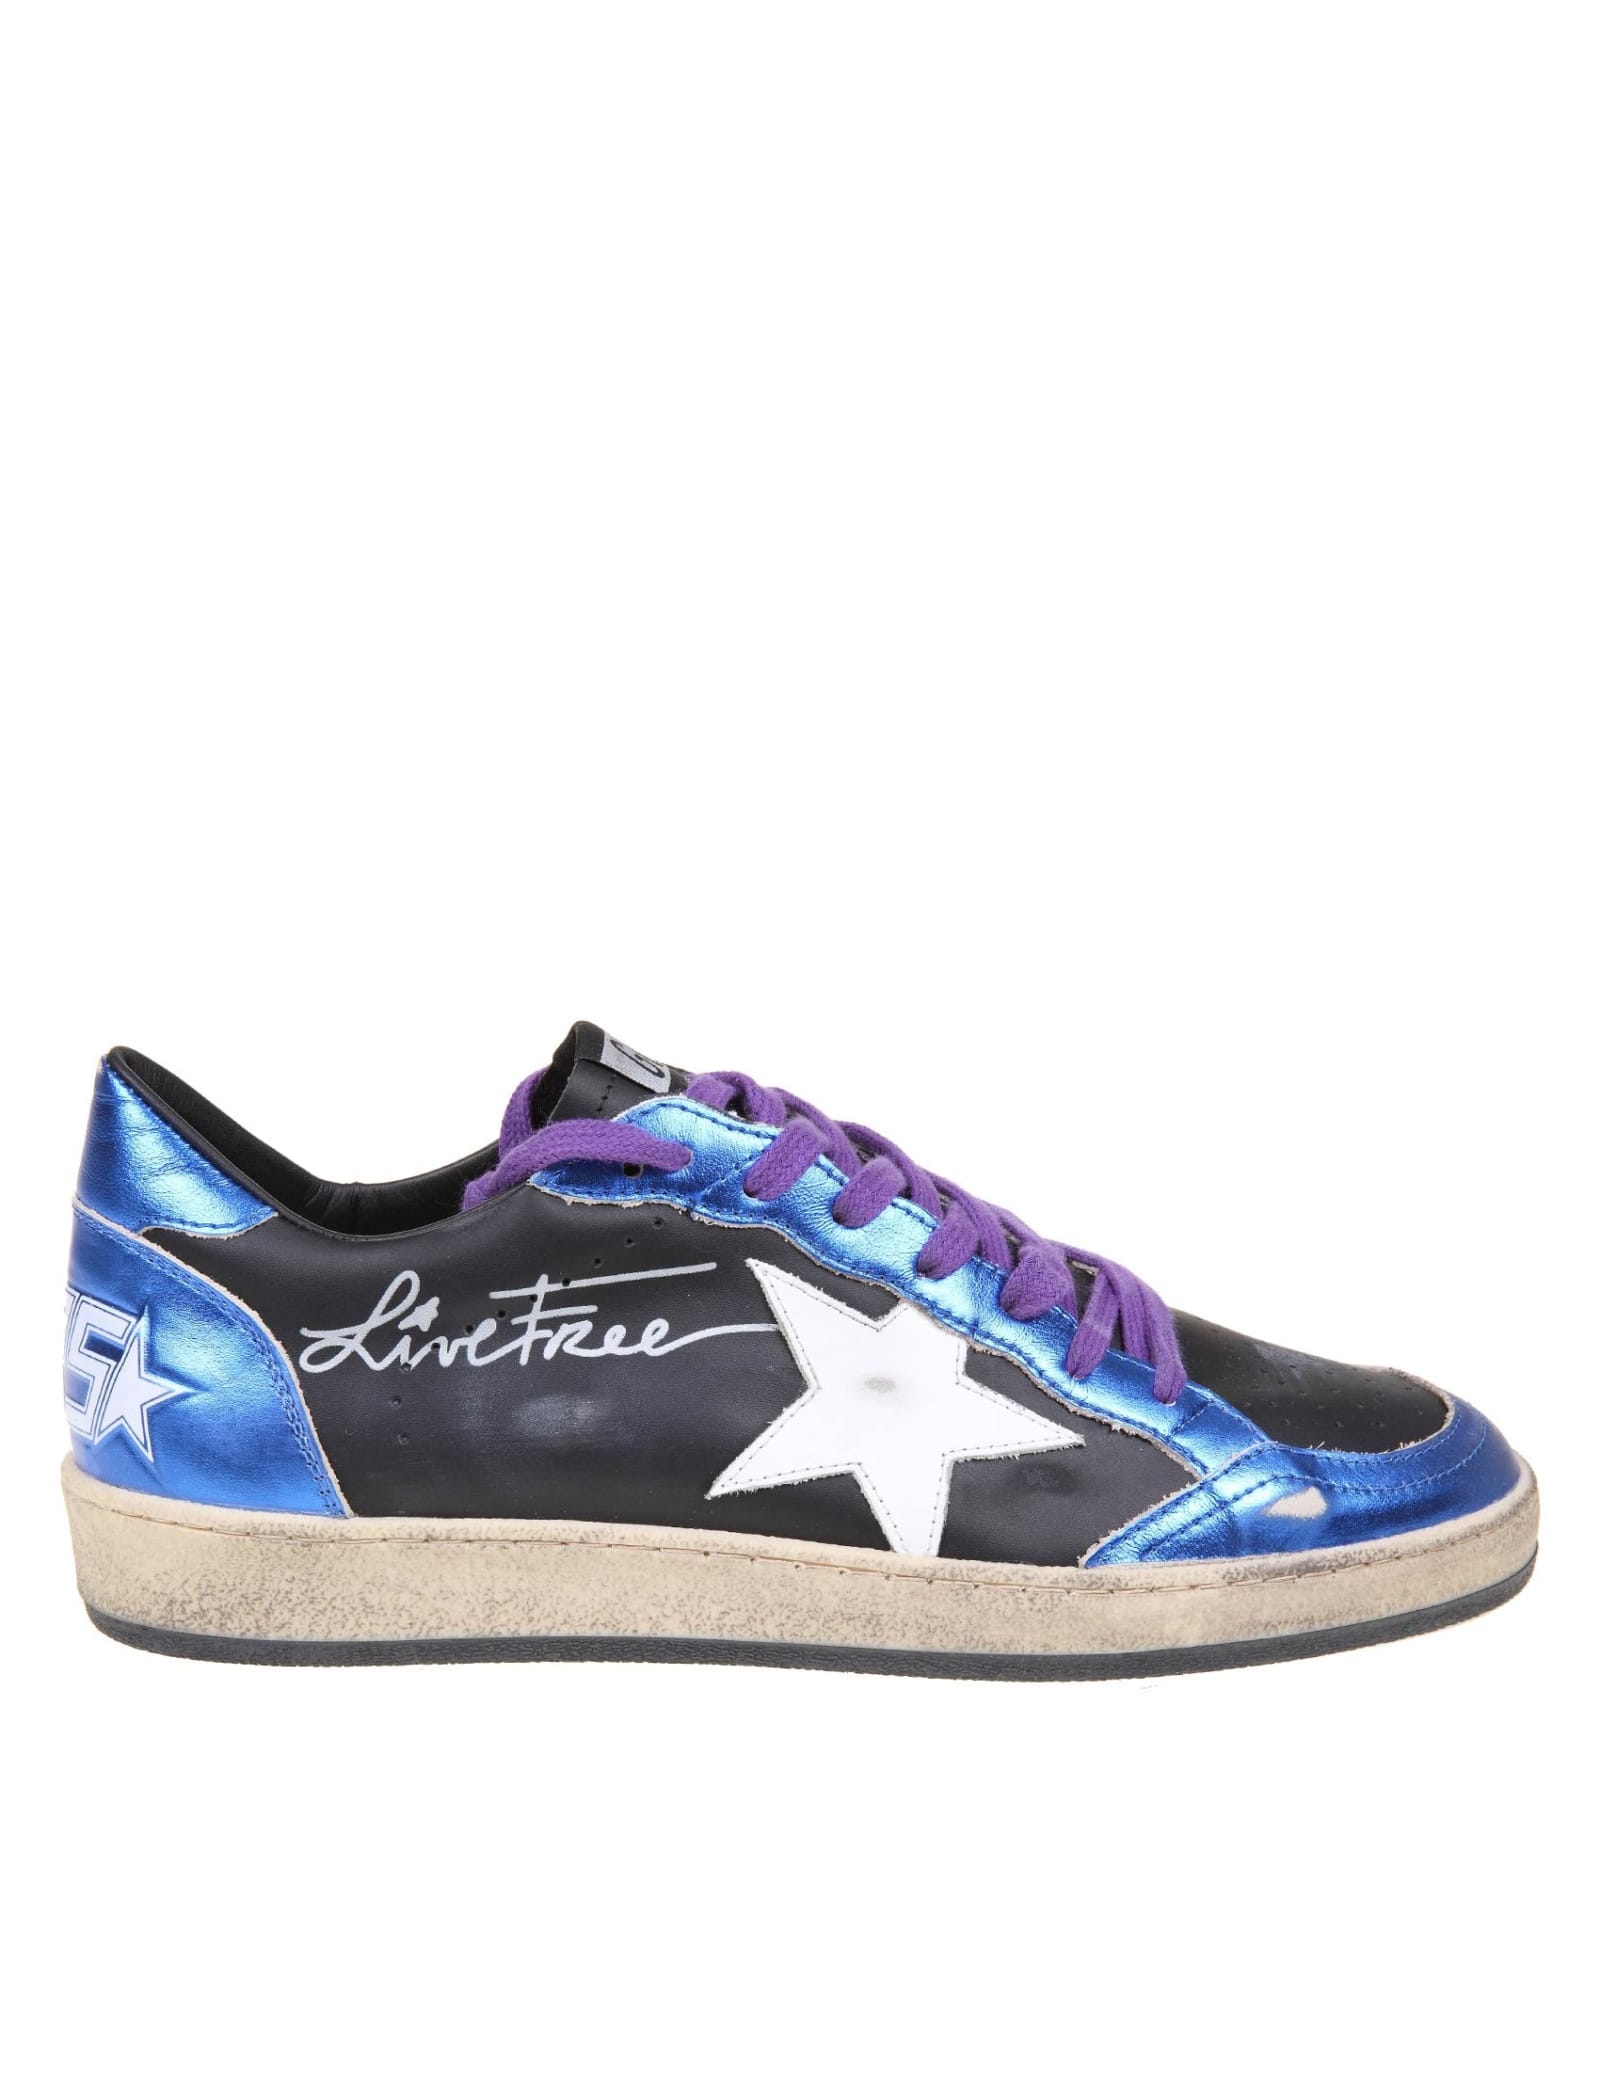 Golden Goose Ball Star In Black And Blue Laminated Leather